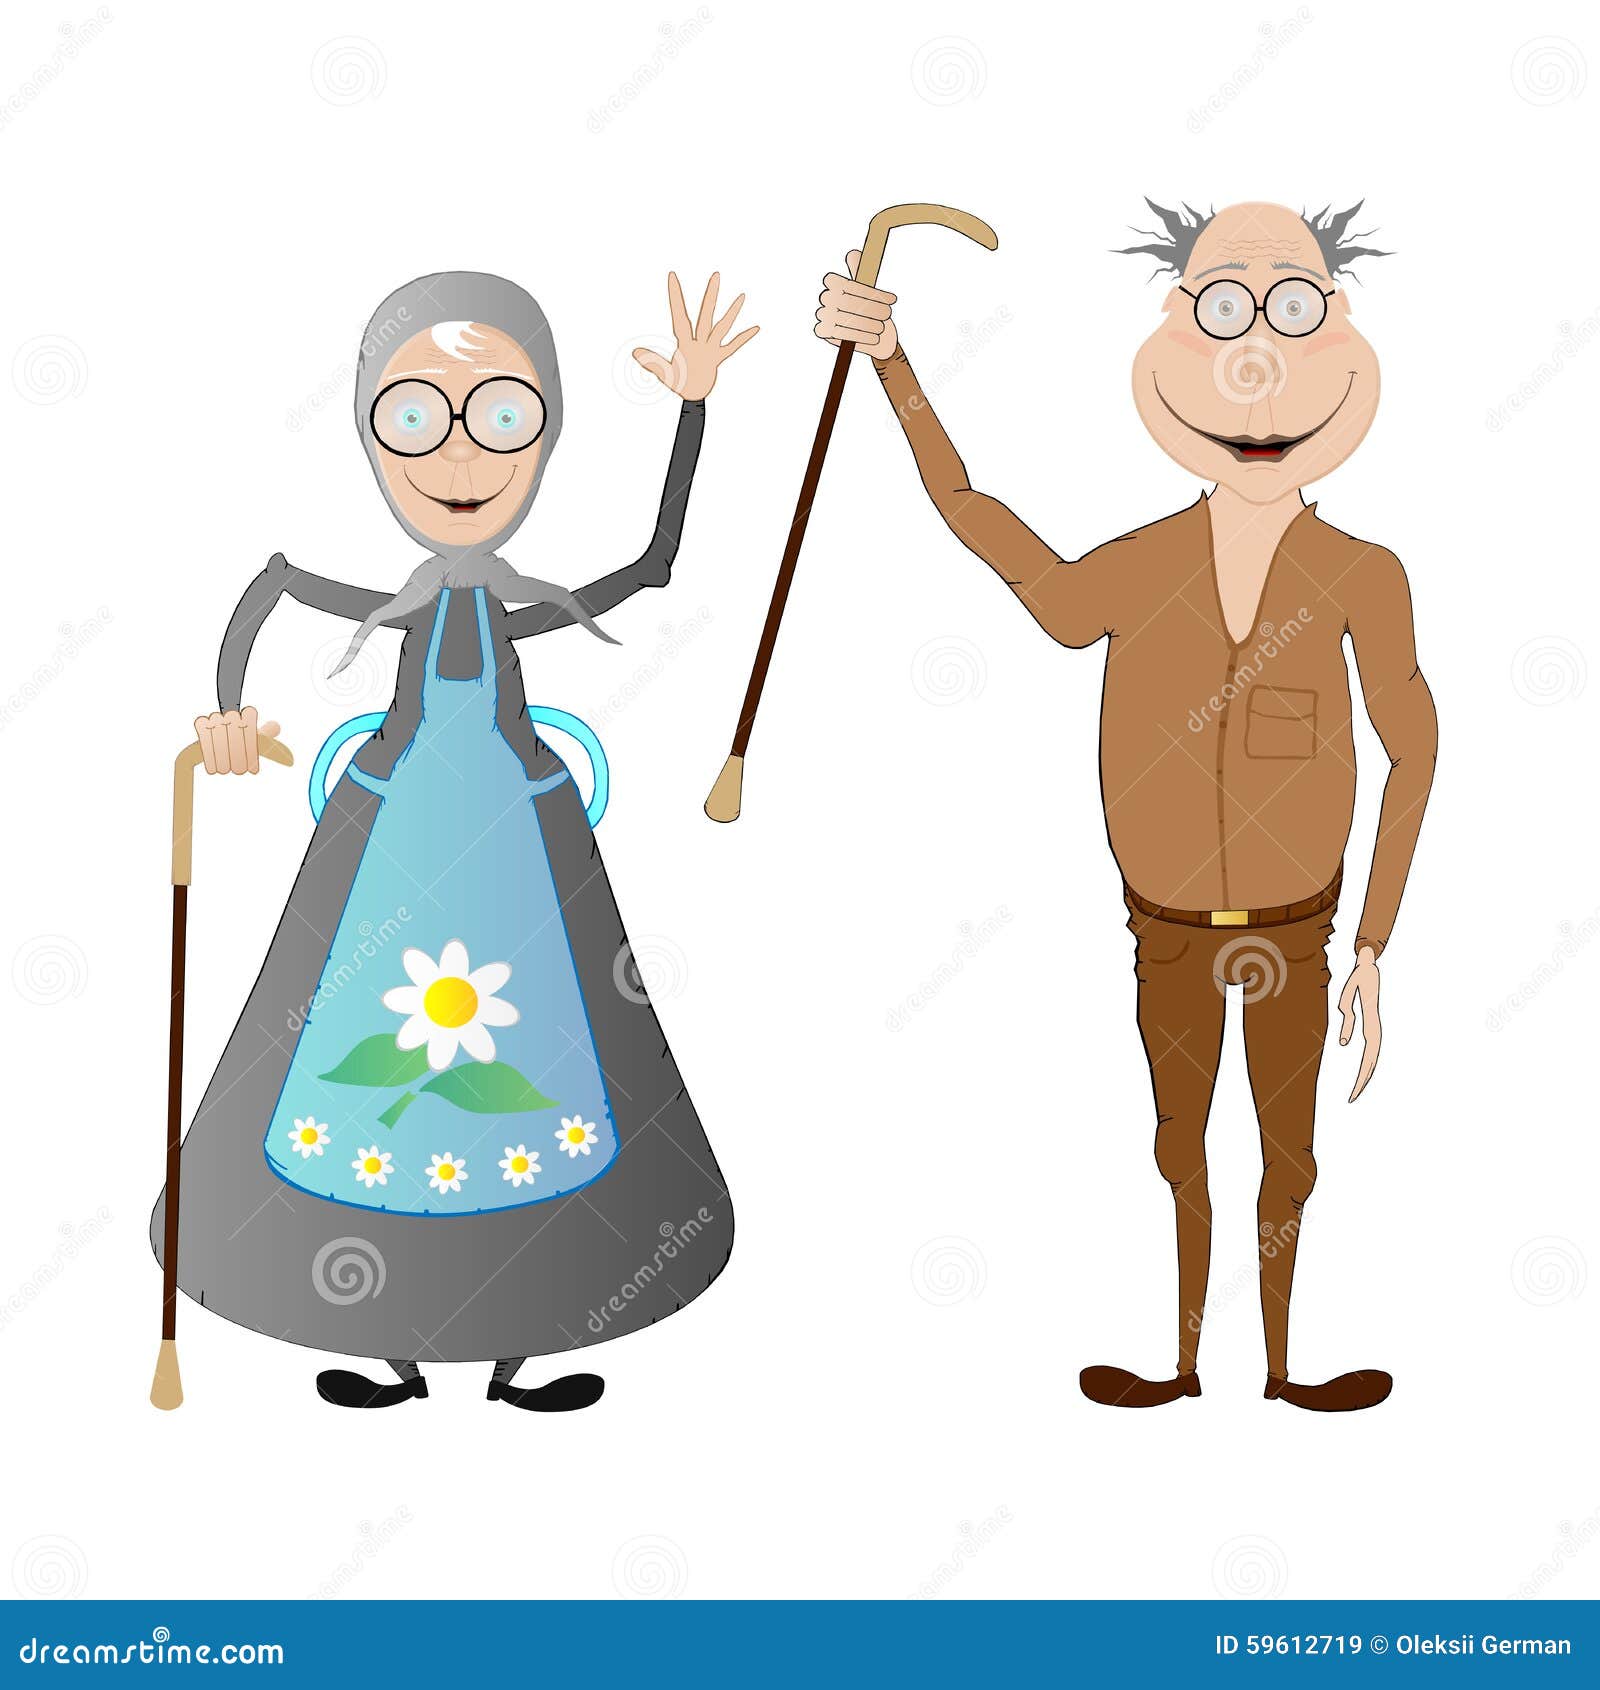 Happy old age stock vector. Illustration of creative - 59612719